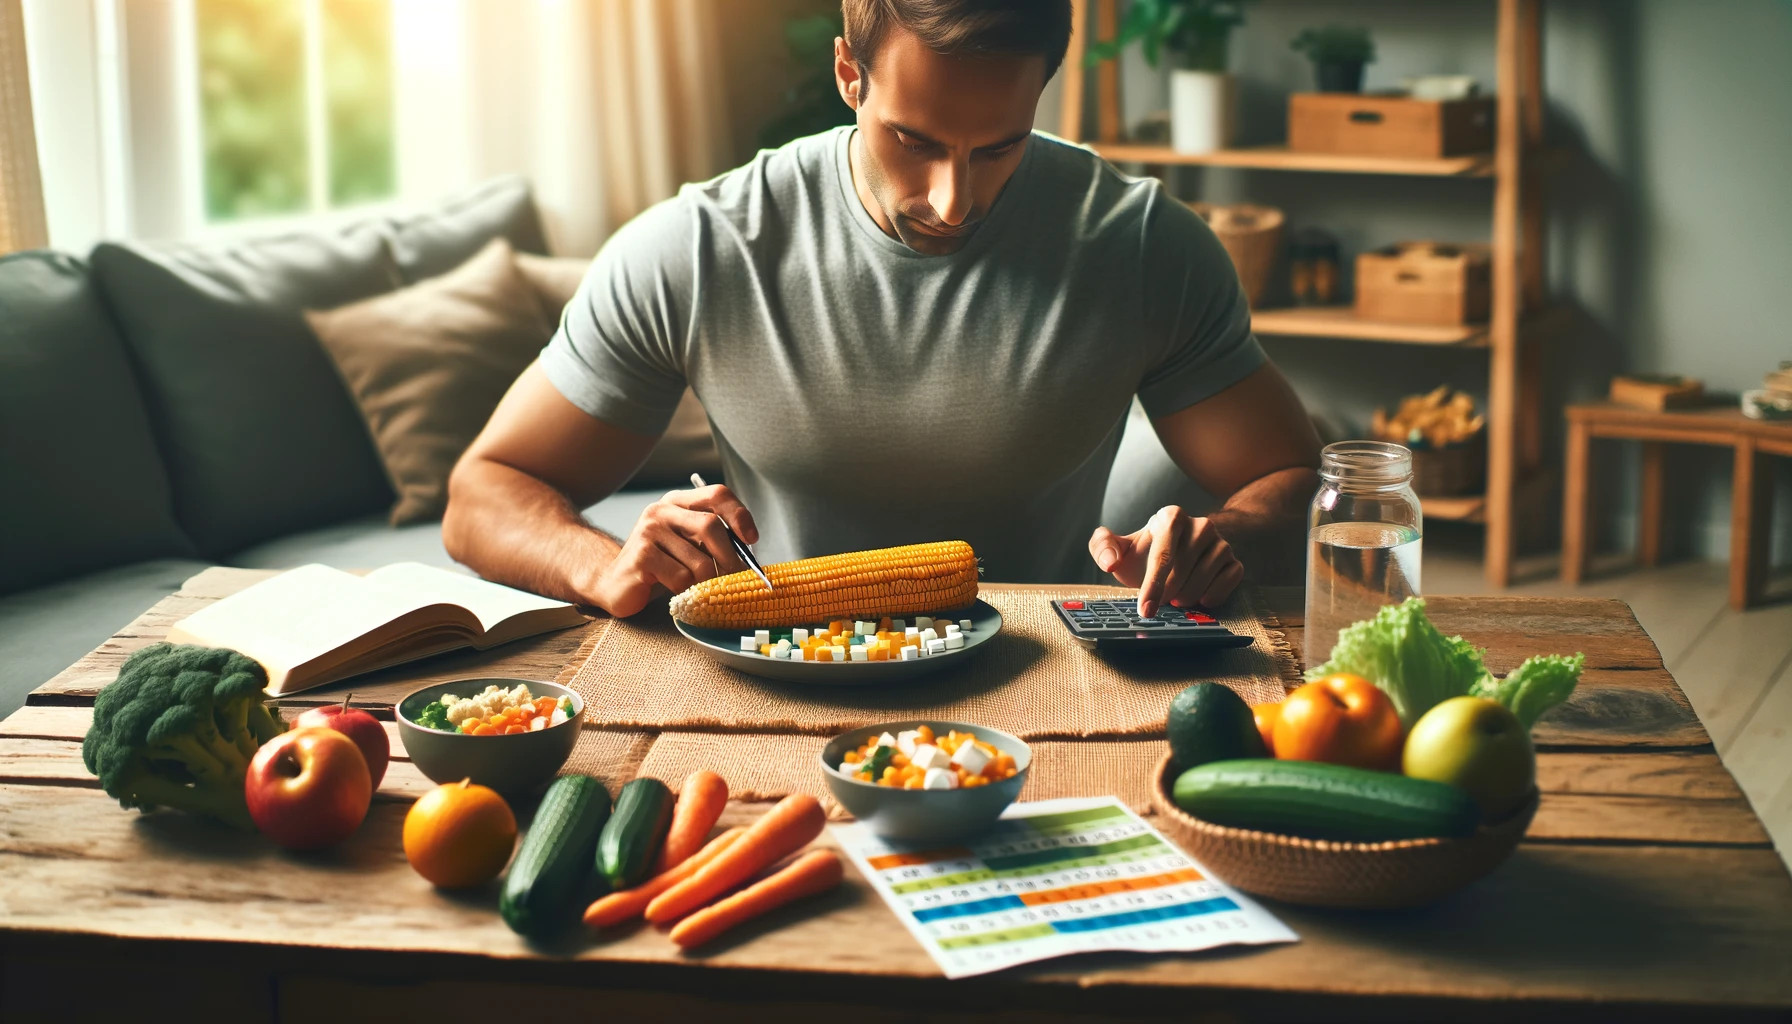 An individual at home, having a meal consisting of corn and other healthy foods, showcasing a commitment to a balanced diet.